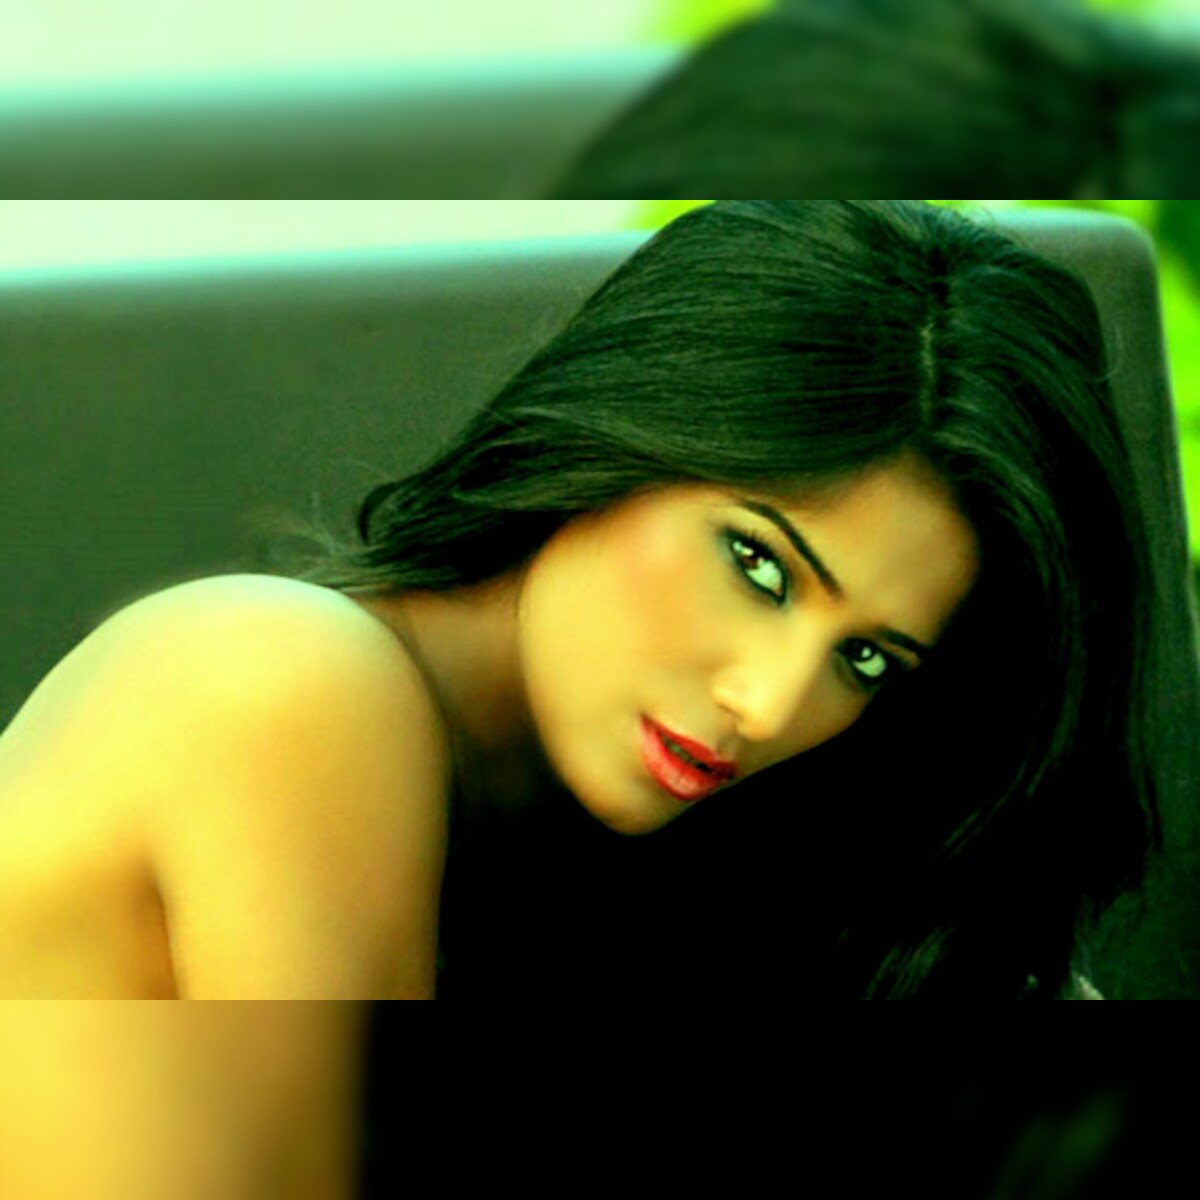 Madhuri Dixit Ki Nangi Sexy - Don't compare me with Sunny Leonne, says Poonam Pandey in Indore